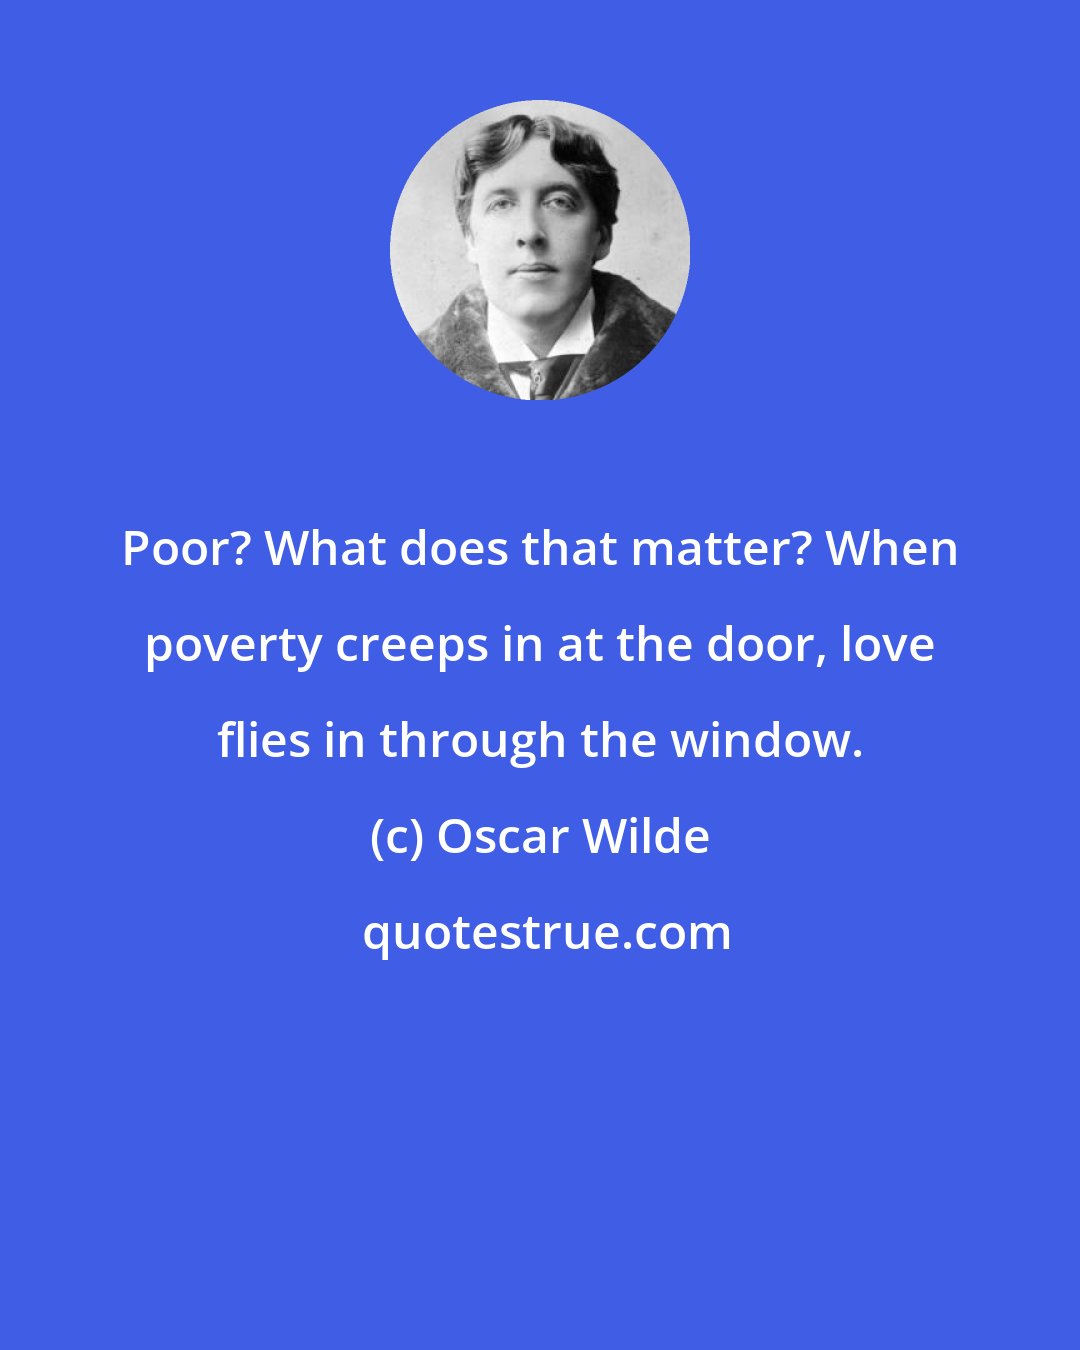 Oscar Wilde: Poor? What does that matter? When poverty creeps in at the door, love flies in through the window.